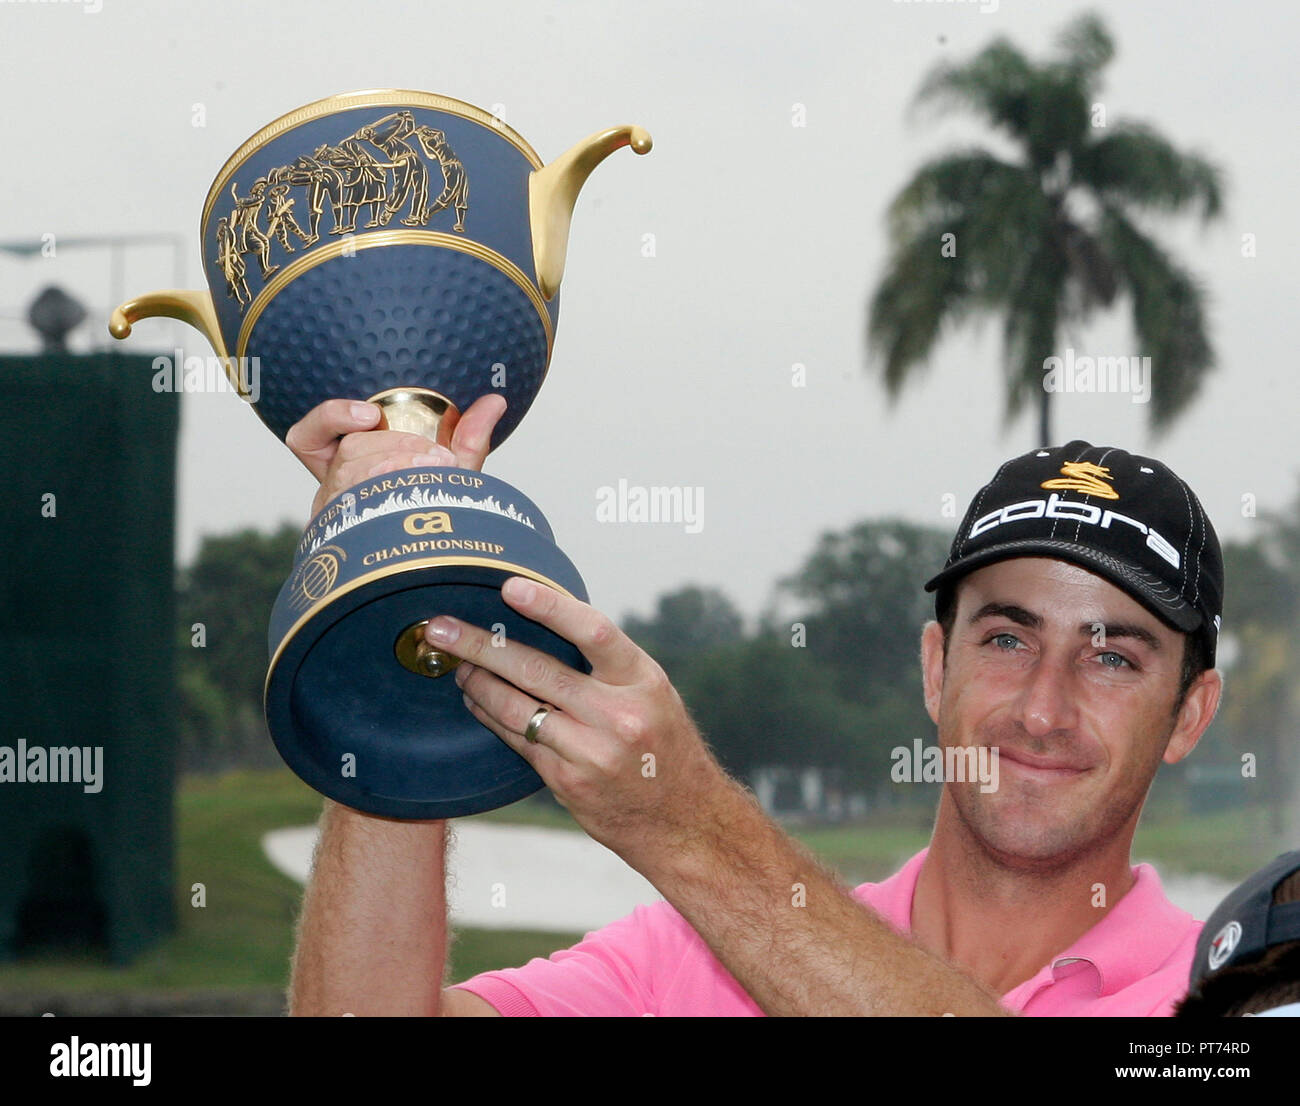 Geoff Ogilvy from Australia celebrates winning the World Golf Championships - CA Championship at Doral Resort and Spa in Doral, Florida on March 24, 2008. Stock Photo